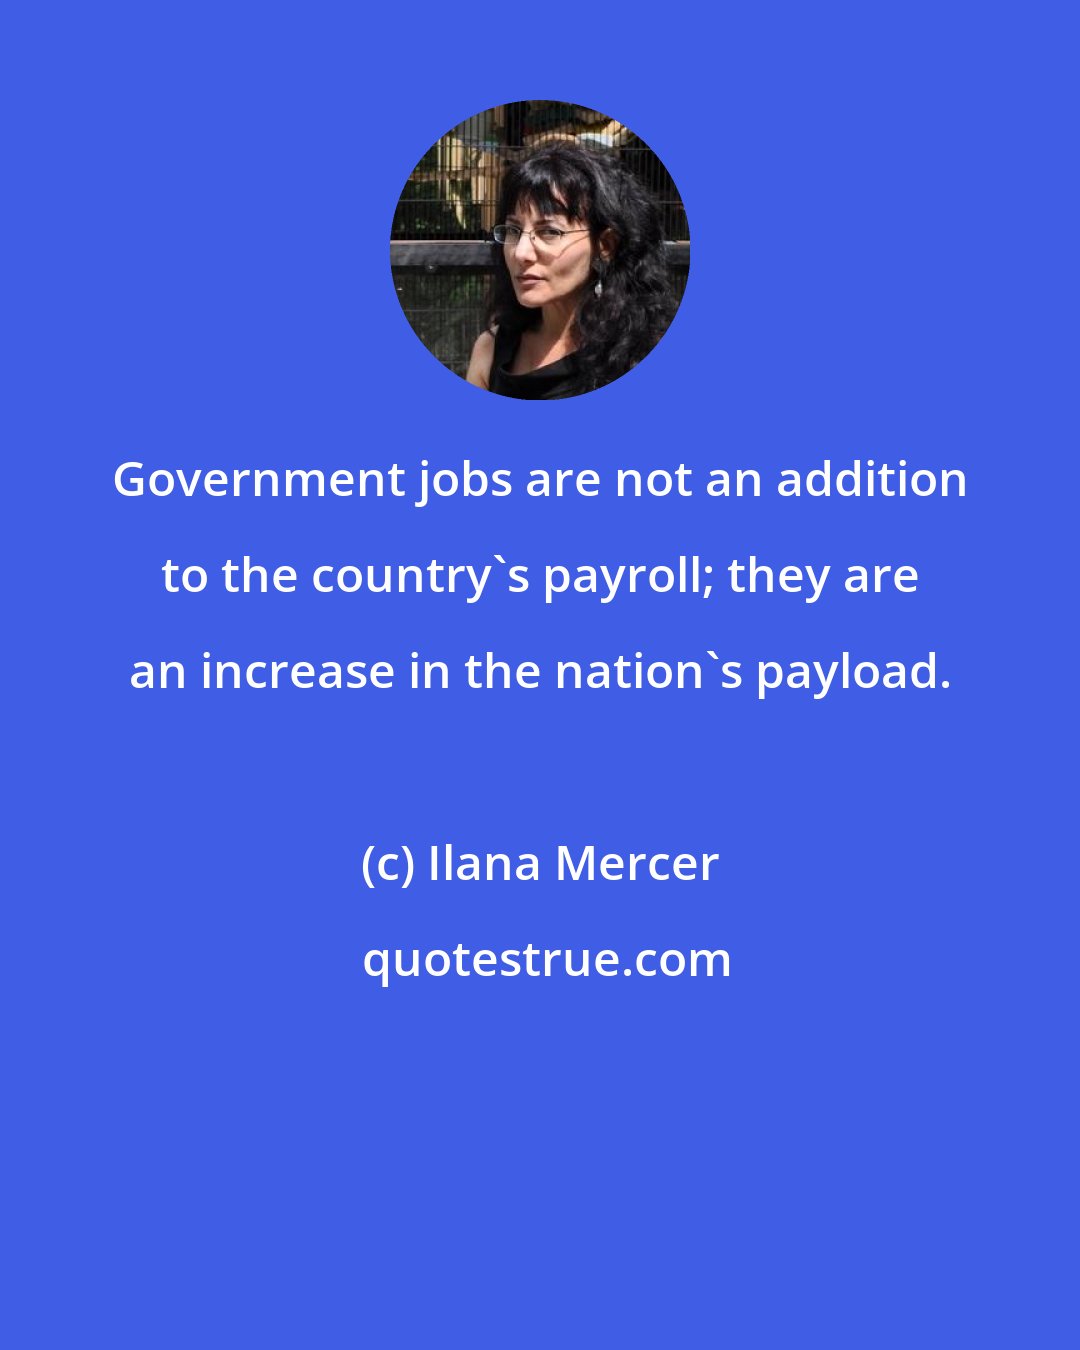 Ilana Mercer: Government jobs are not an addition to the country's payroll; they are an increase in the nation's payload.